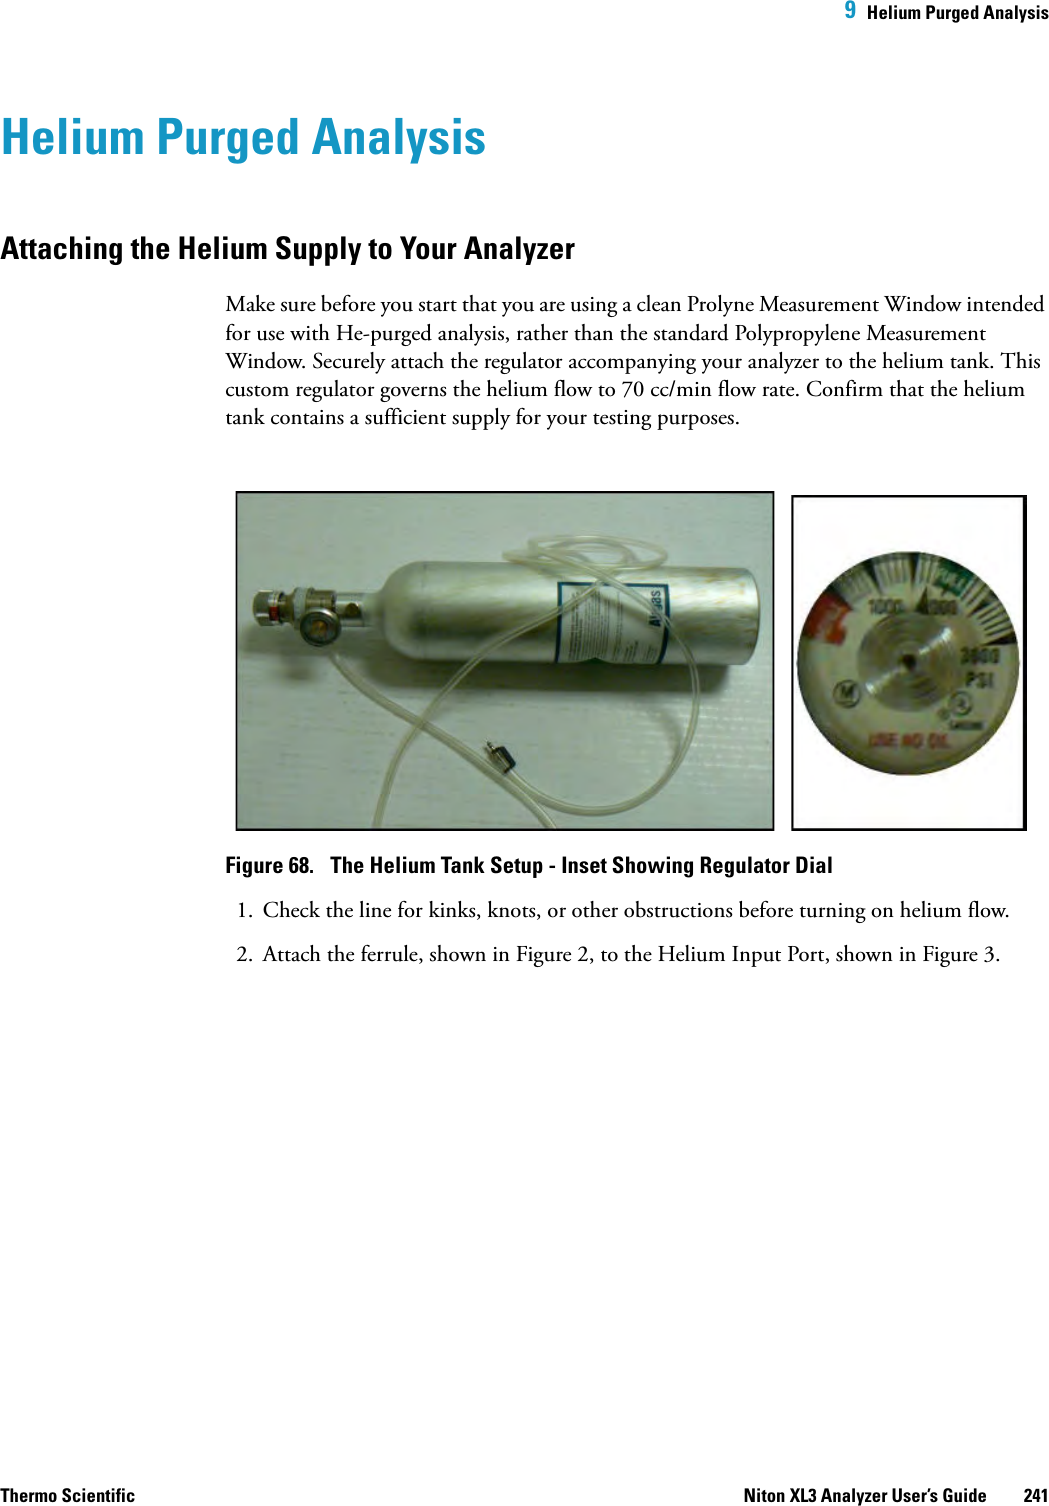  9  Helium Purged AnalysisThermo Scientific Niton XL3 Analyzer User’s Guide 241Helium Purged AnalysisAttaching the Helium Supply to Your AnalyzerMake sure before you start that you are using a clean Prolyne Measurement Window intended for use with He-purged analysis, rather than the standard Polypropylene Measurement Window. Securely attach the regulator accompanying your analyzer to the helium tank. This custom regulator governs the helium flow to 70 cc/min flow rate. Confirm that the helium tank contains a sufficient supply for your testing purposes.Figure 68.  The Helium Tank Setup - Inset Showing Regulator Dial1. Check the line for kinks, knots, or other obstructions before turning on helium flow.2. Attach the ferrule, shown in Figure 2, to the Helium Input Port, shown in Figure 3.